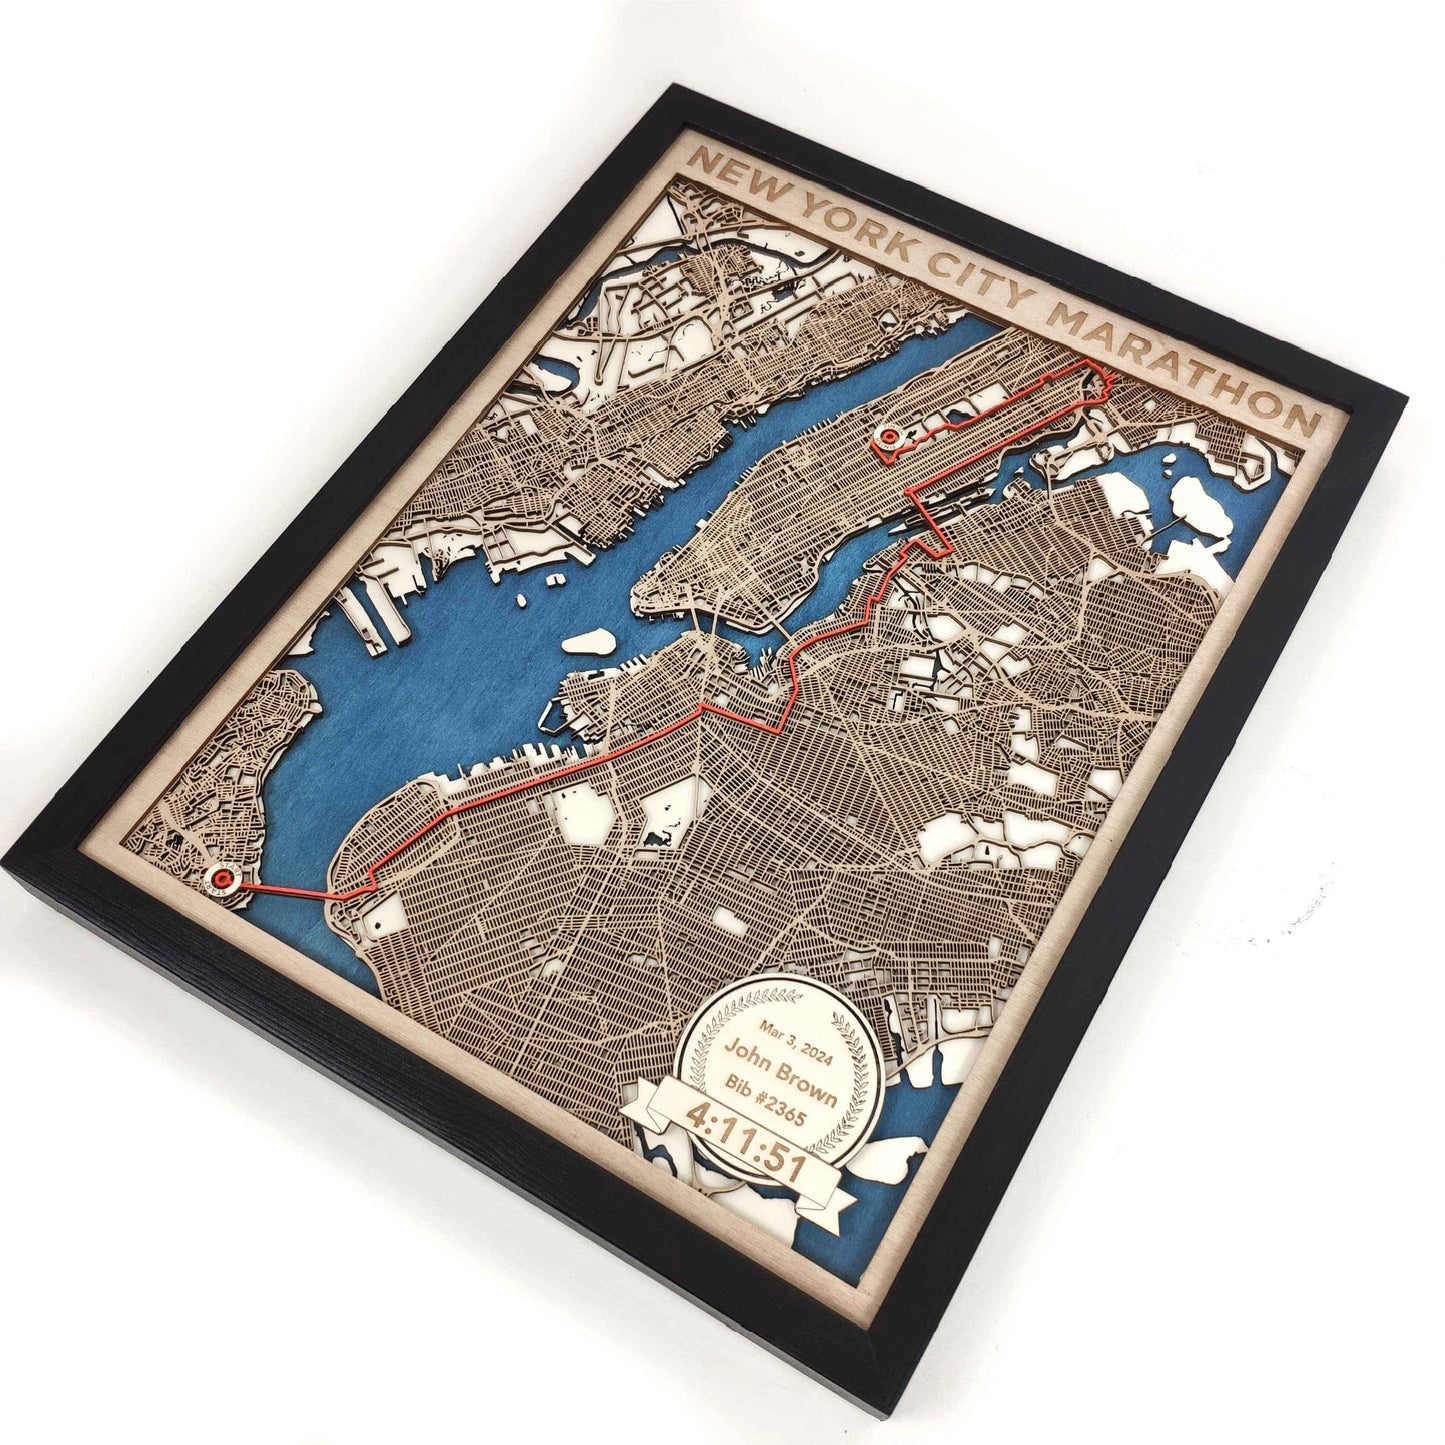 New York City Marathon Wooden Map by CityWood - Custom Wood Map Art - Unique Laser Cut Engraved - Anniversary Gift